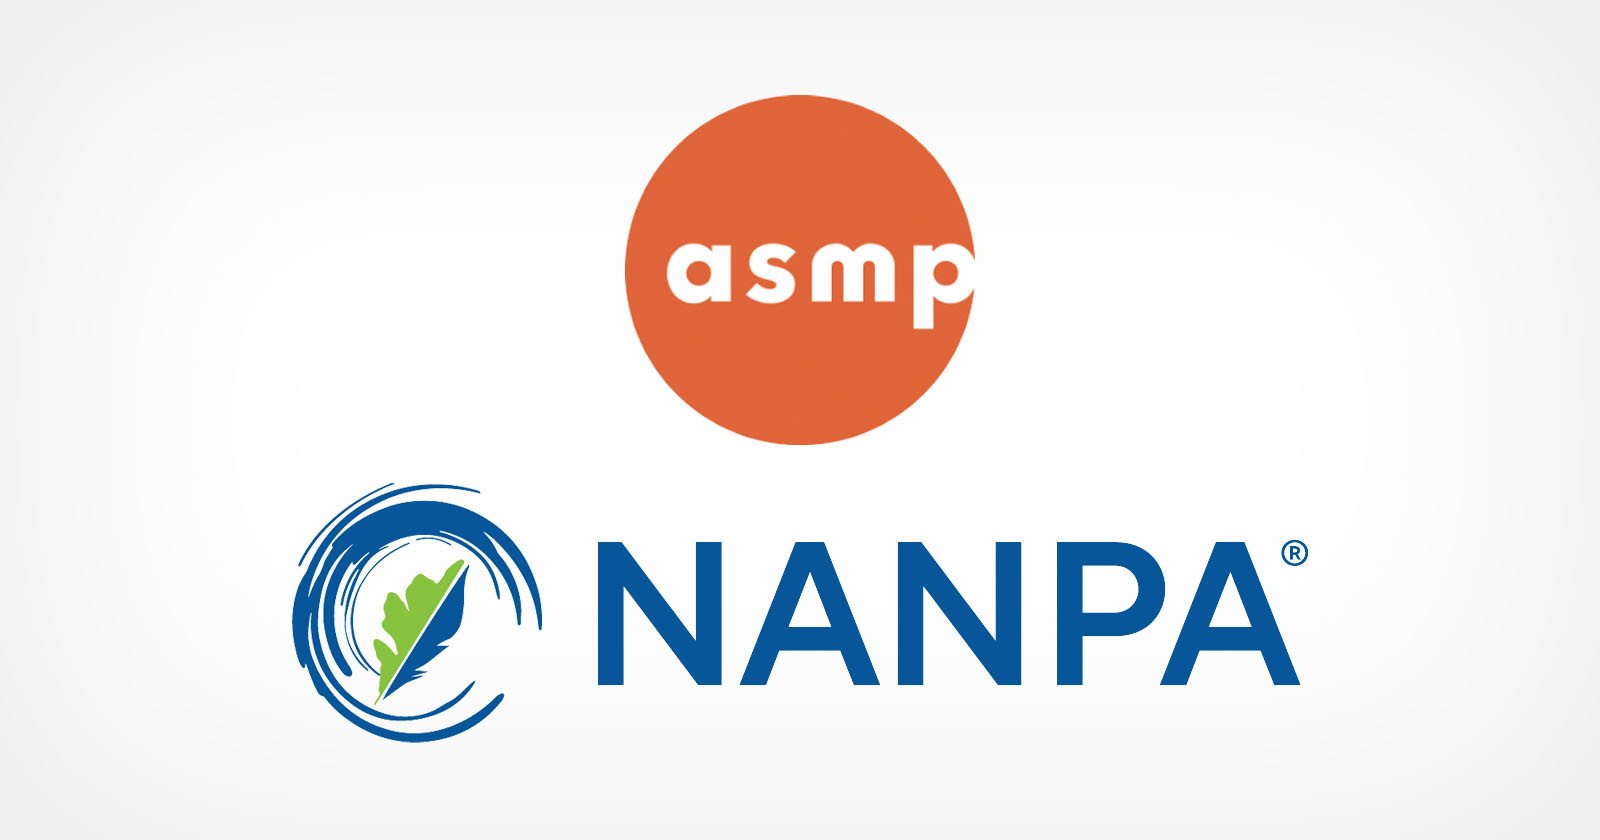 ASMP and NANPA Combine into a New Photography Association